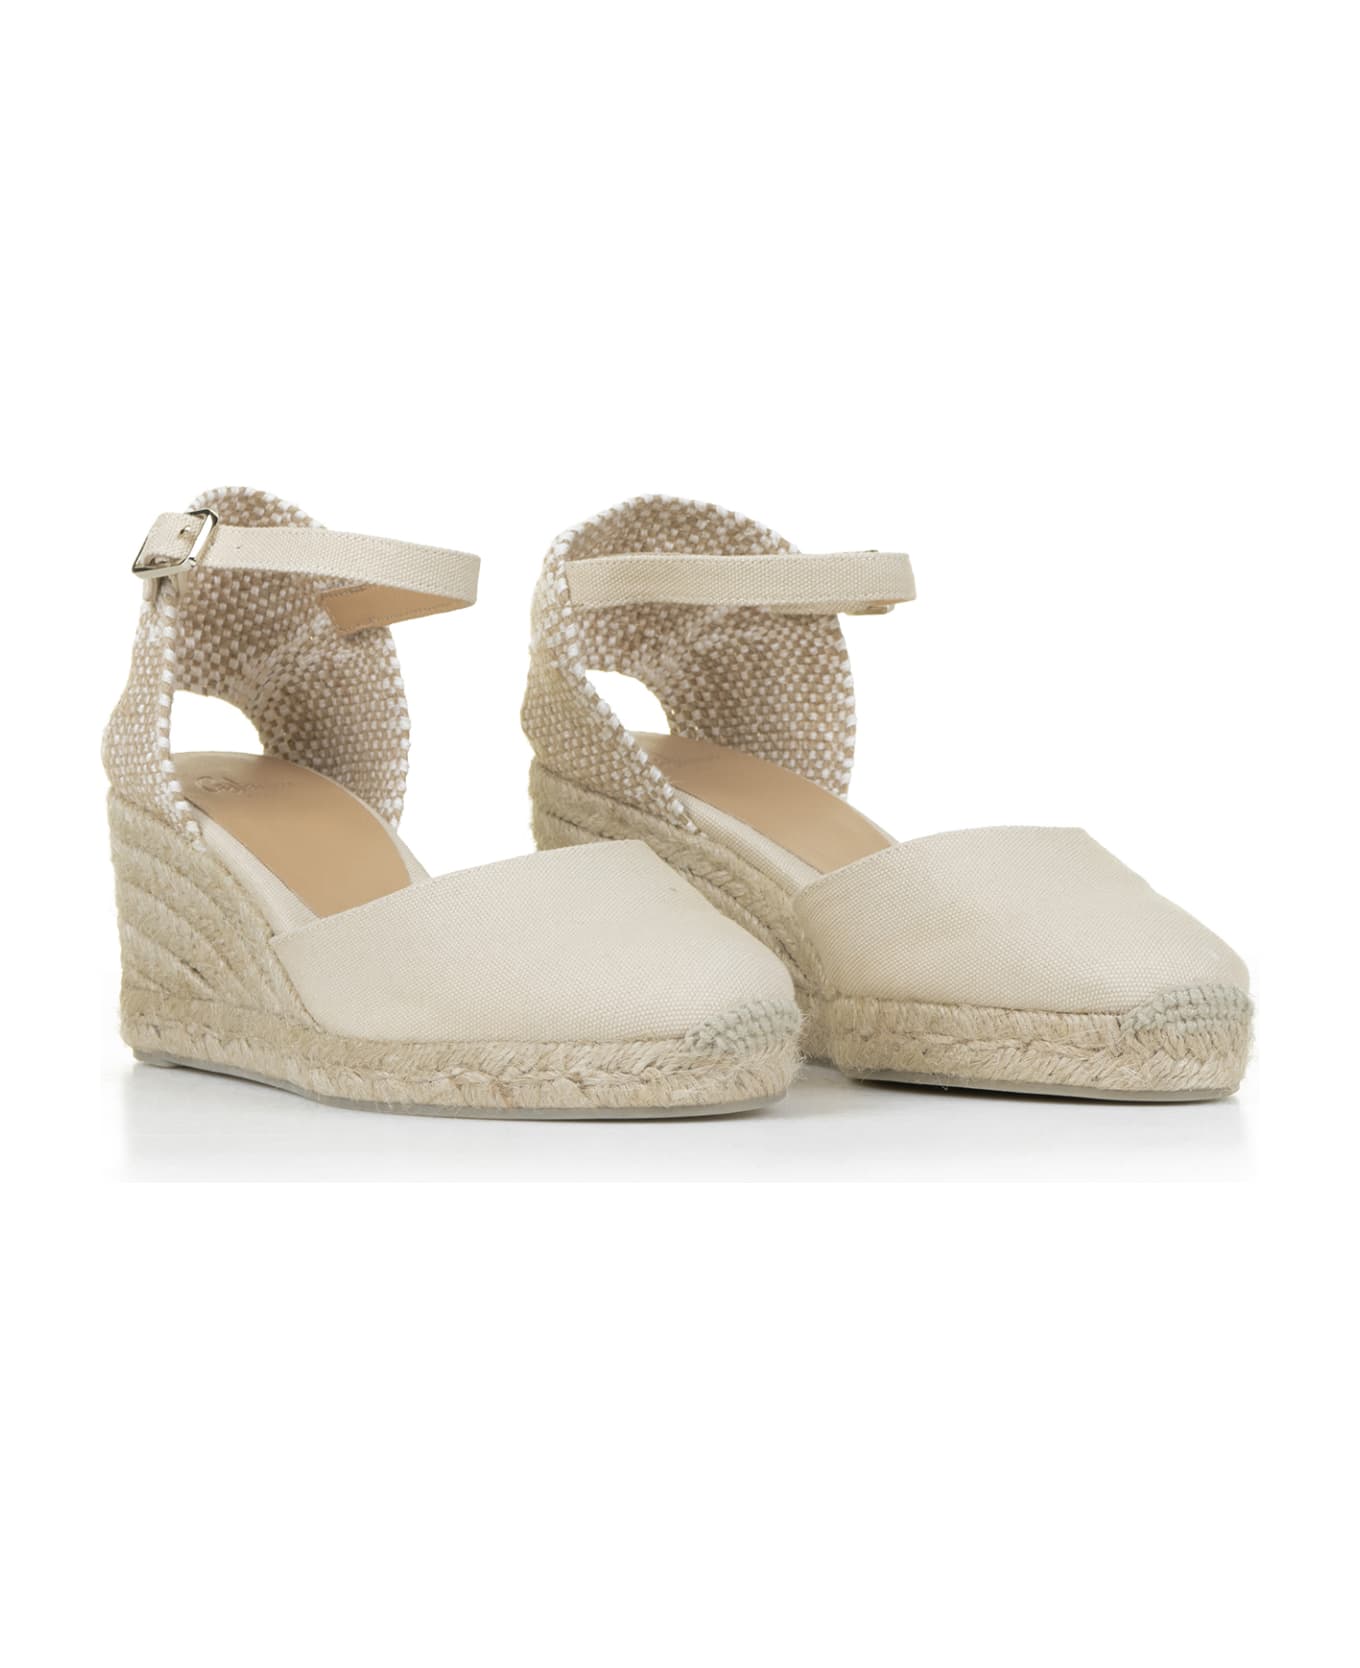 Castañer Carol Espadrilles In Canvas With Wedge - IVORY ウェッジシューズ